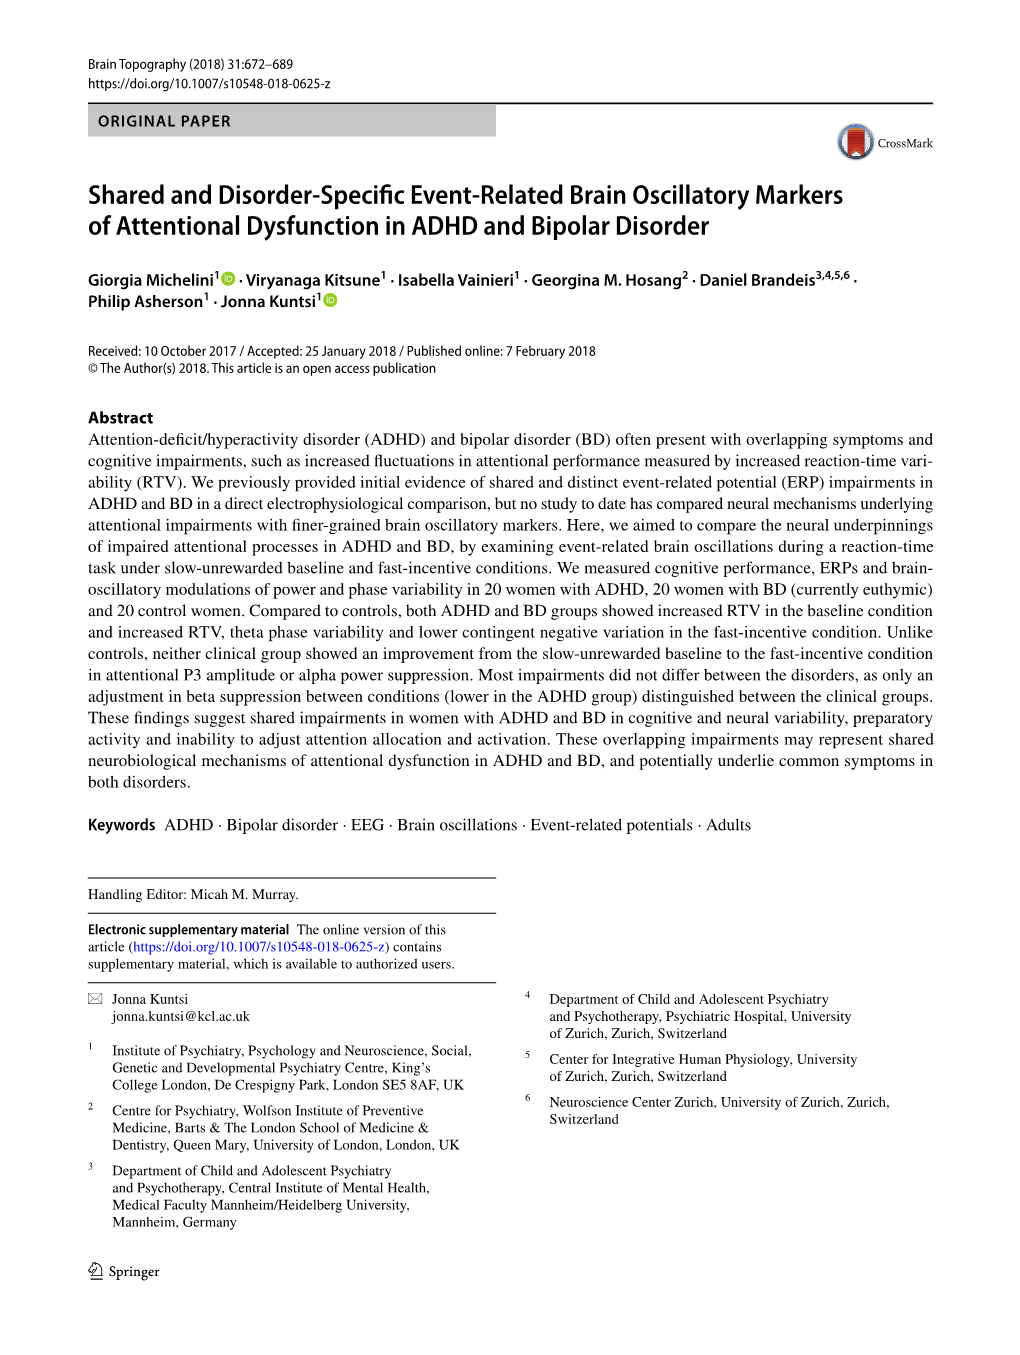 Shared and Disorder-Specific Event-Related Brain Oscillatory Markers of Attentional Dysfunction in ADHD and Bipolar Disorder